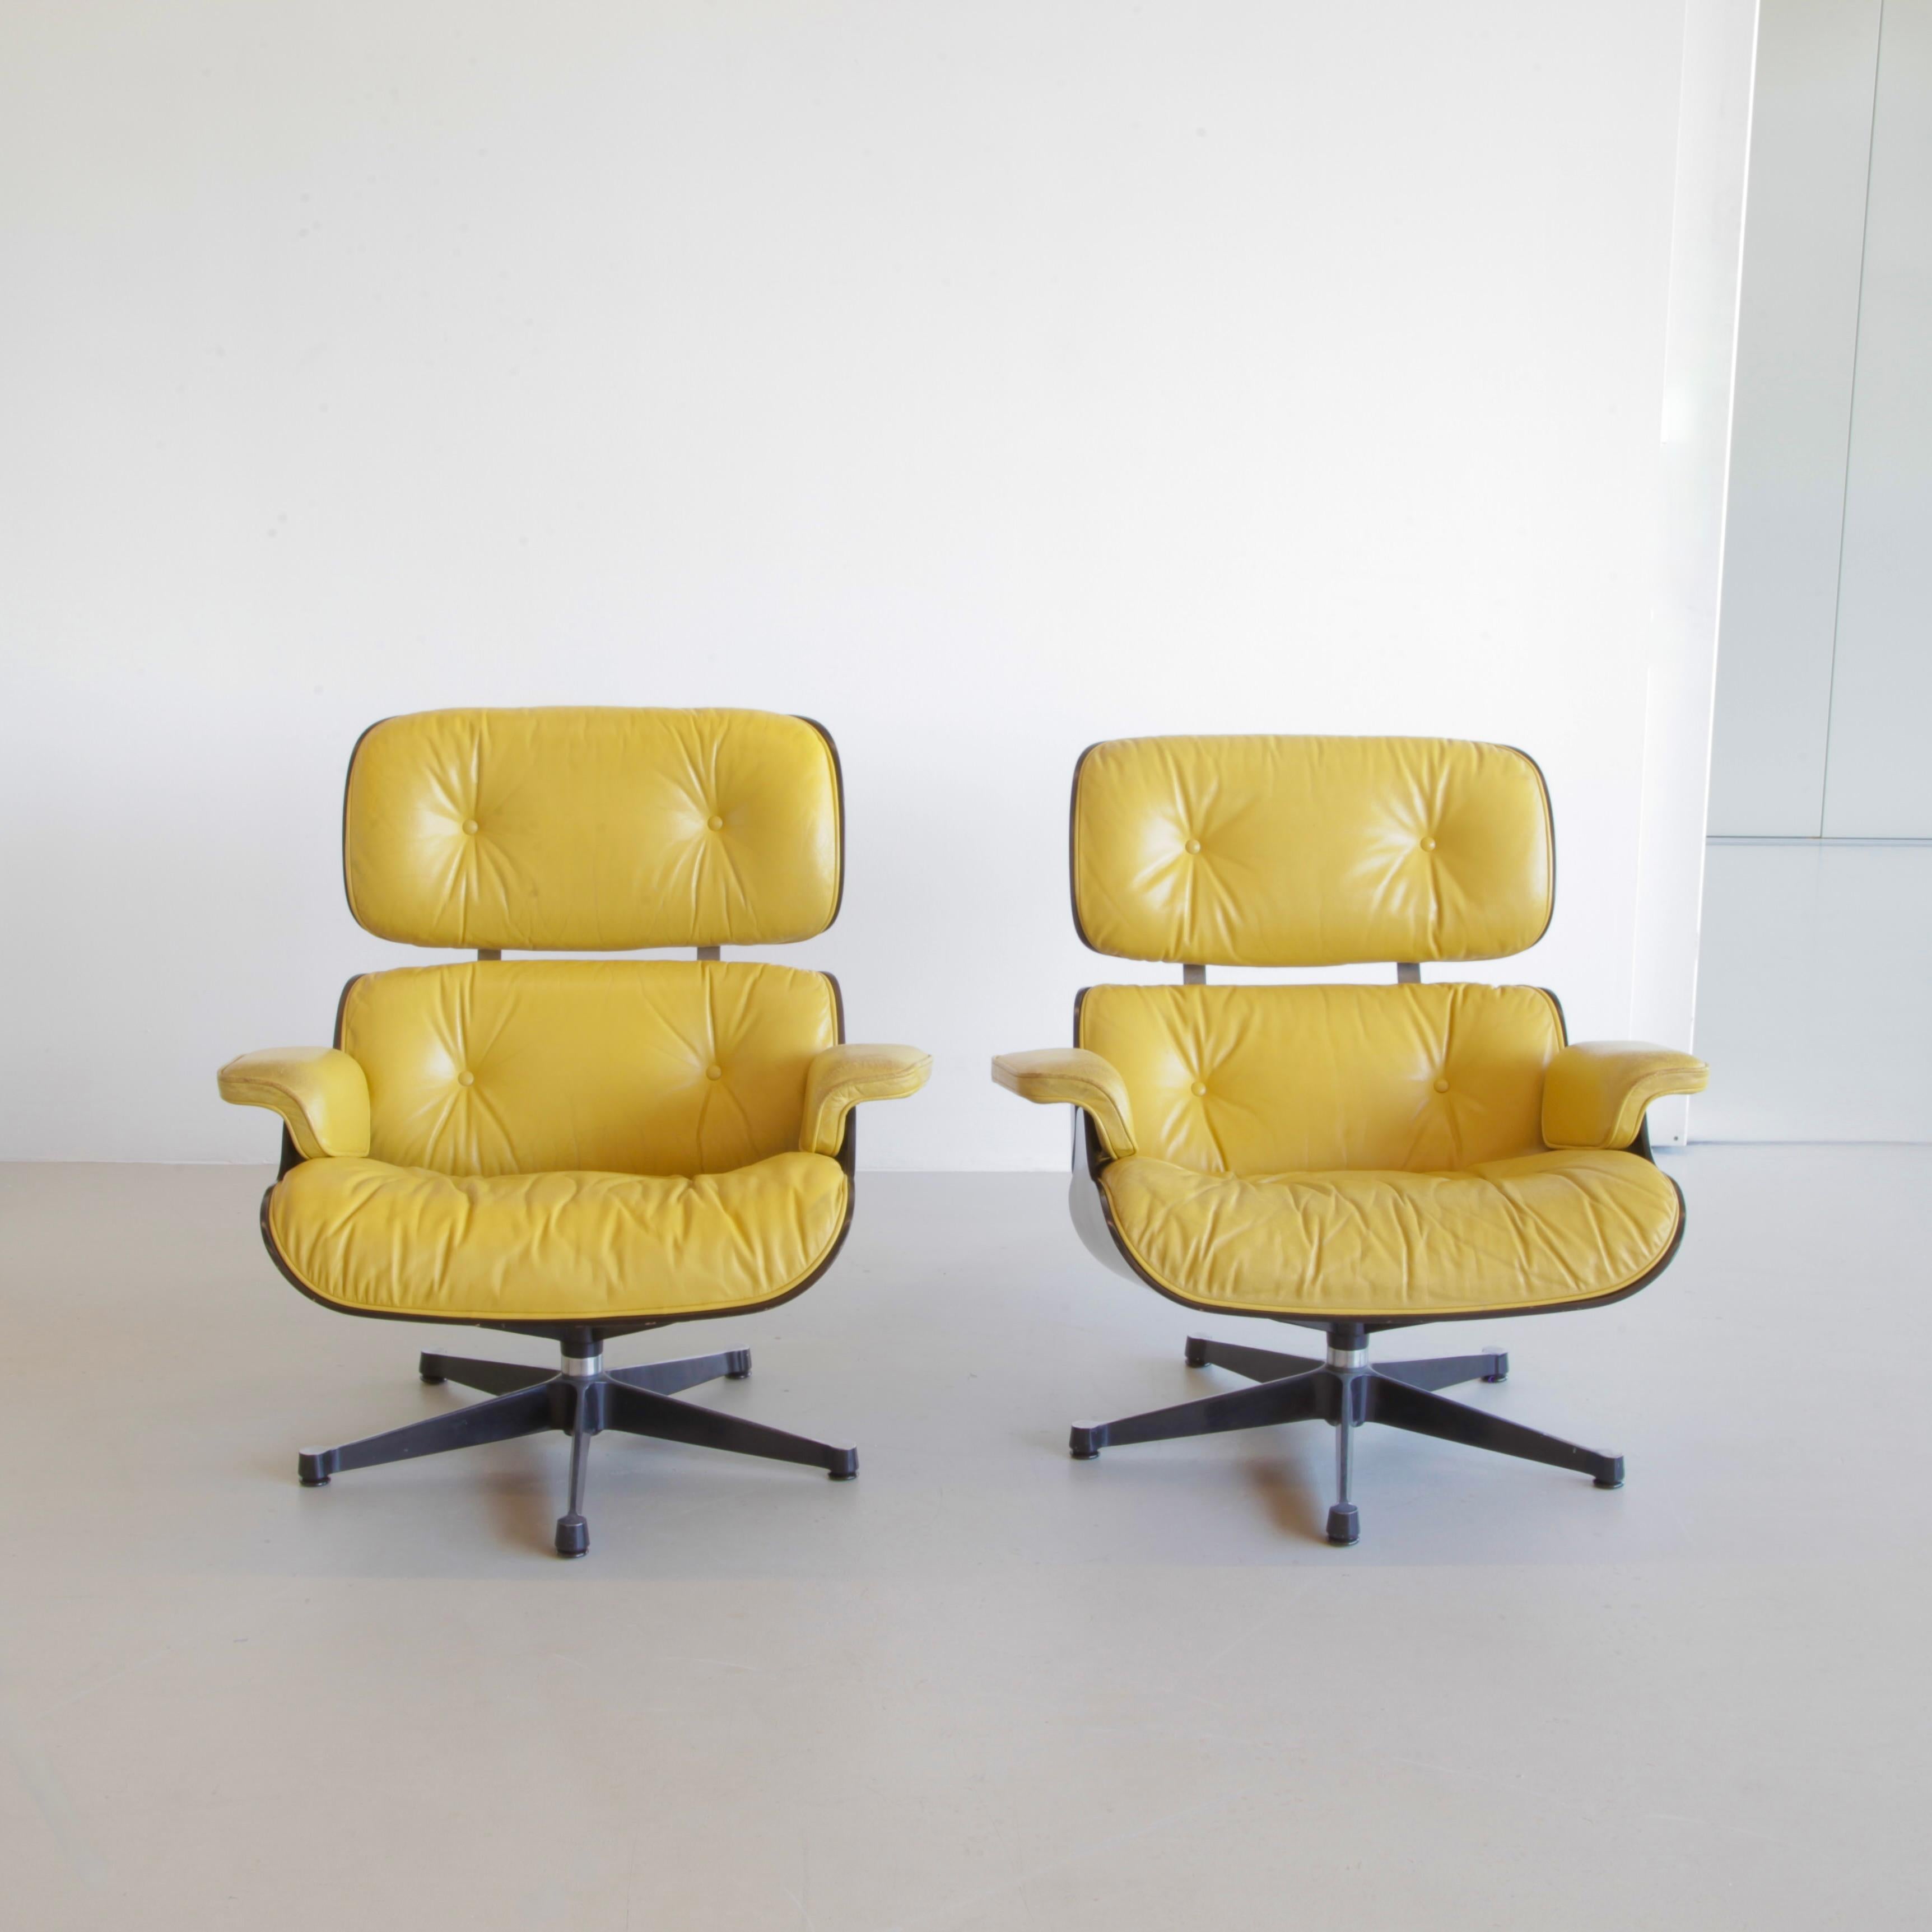 Leather Pair of Lounge Chairs by Charles & Ray Eames, Vitra, 1980s For Sale